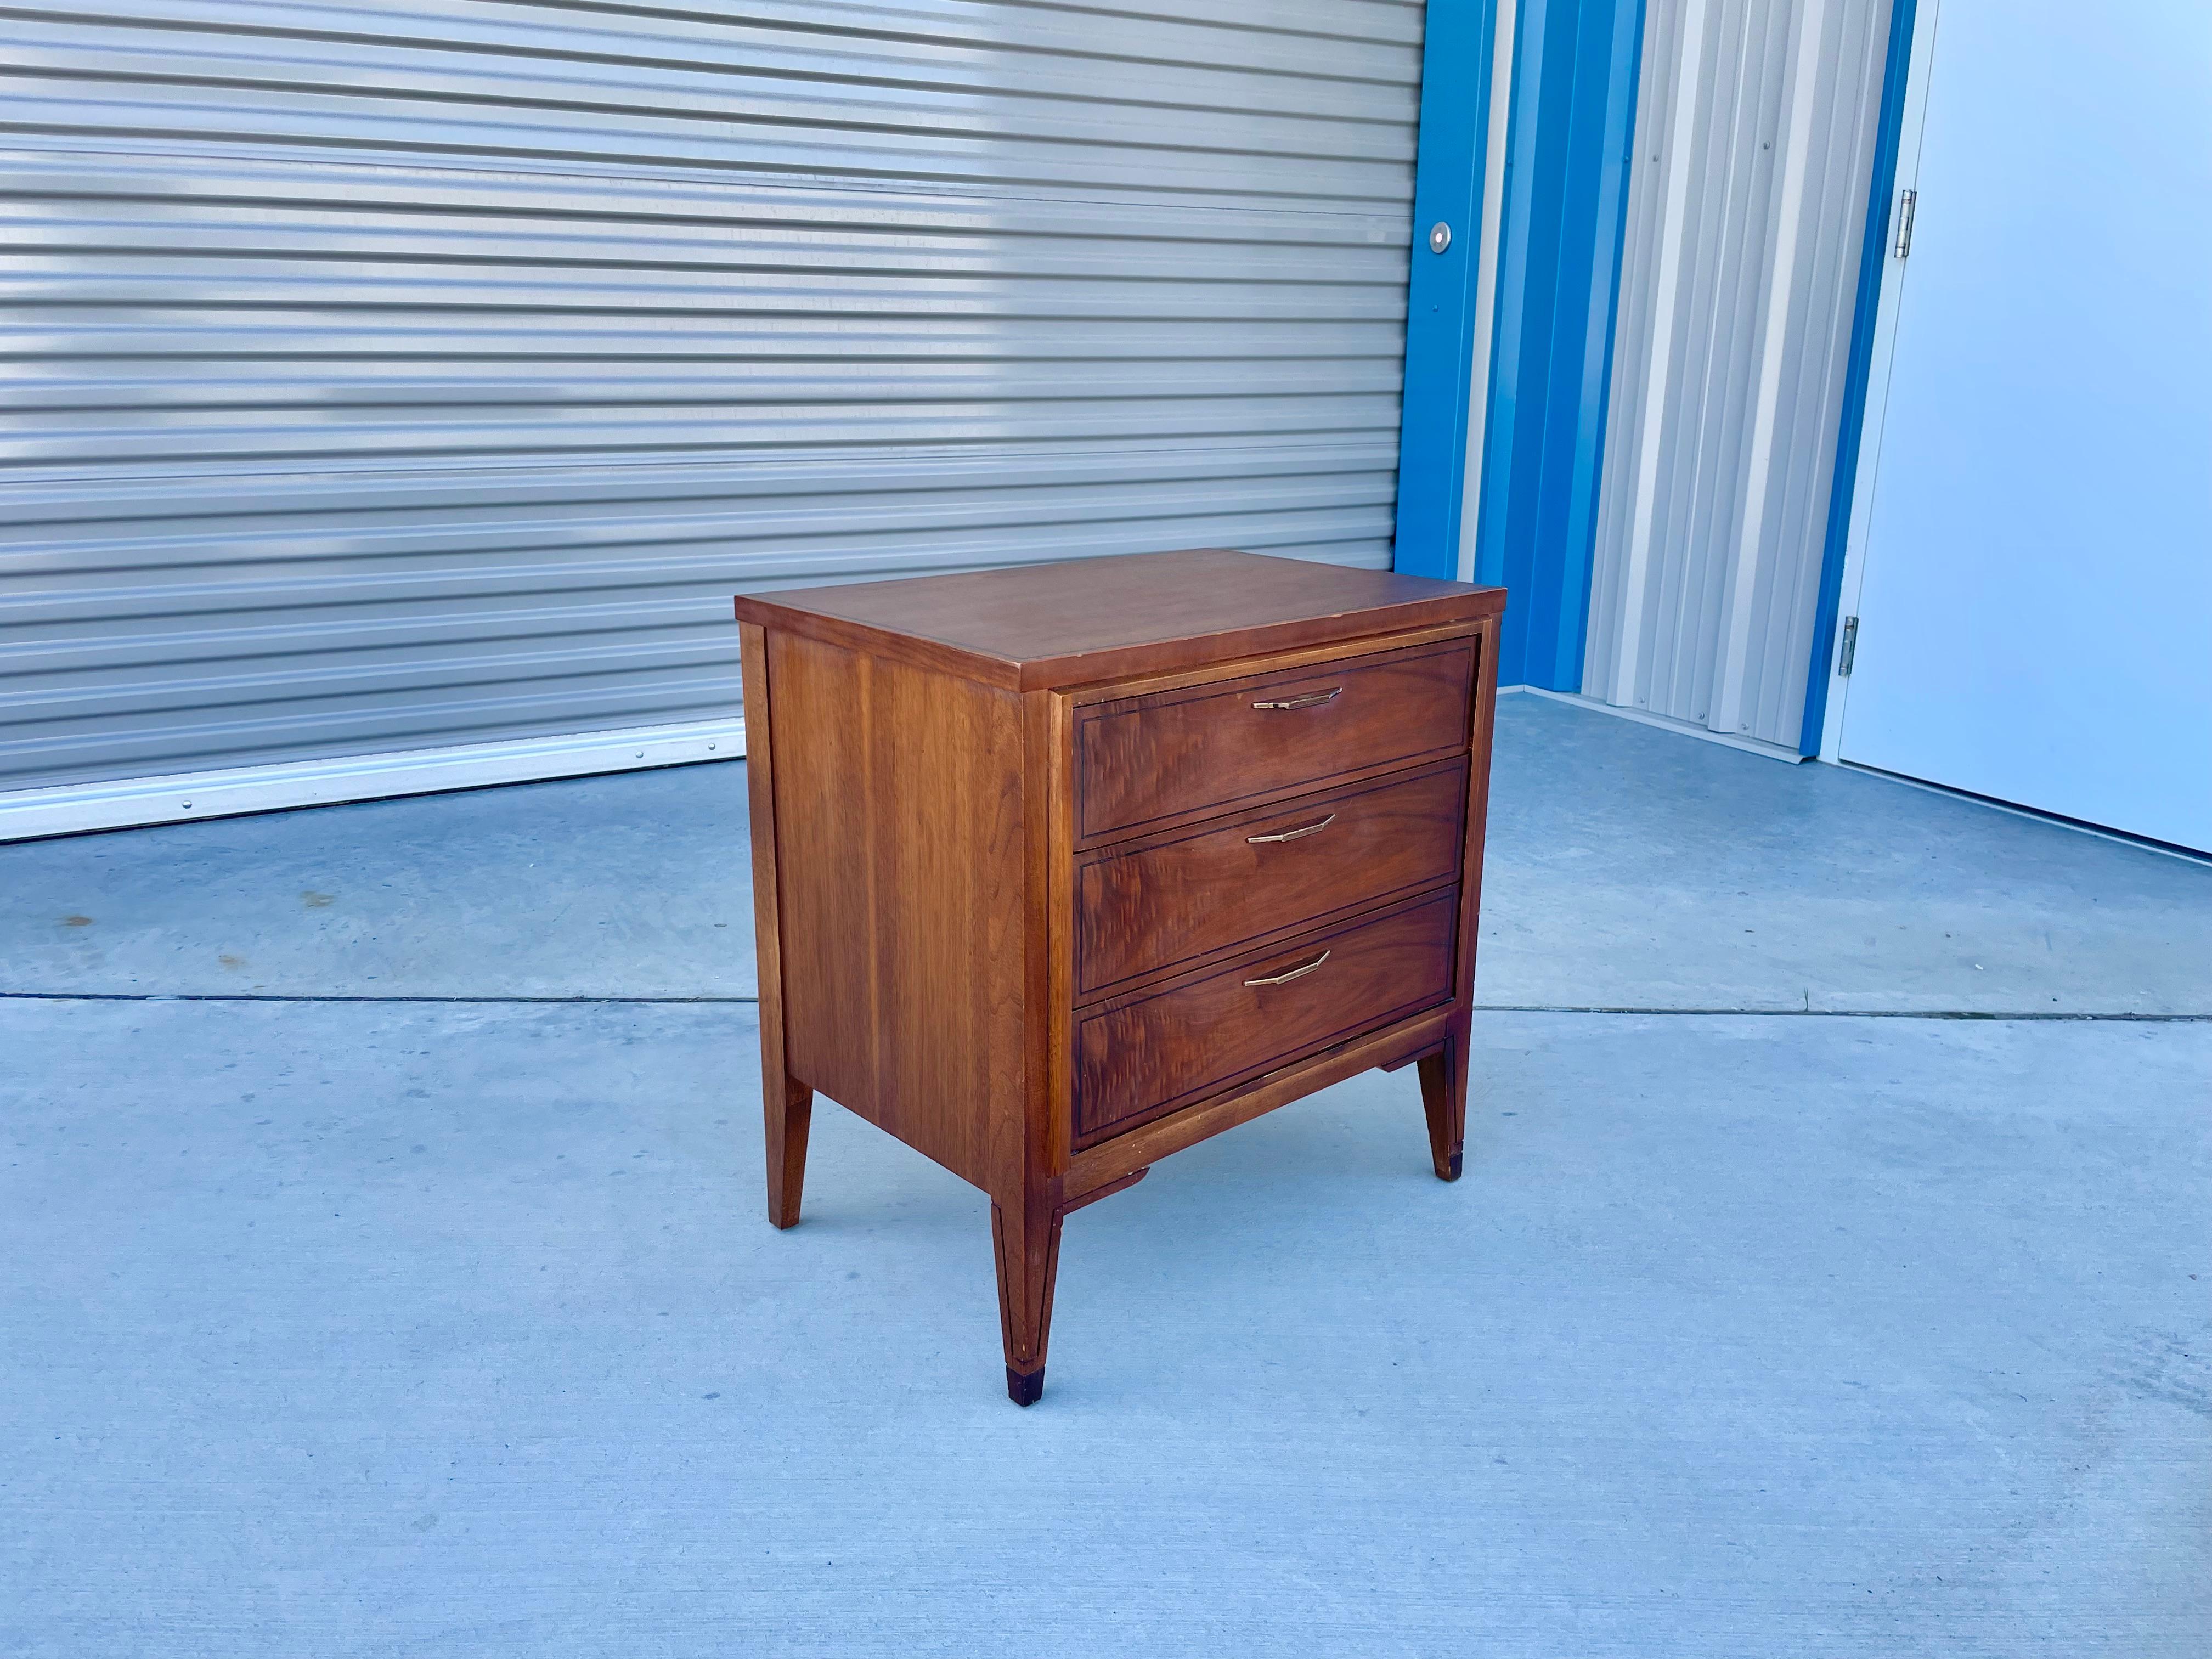 Mid-century walnut nightstand designed and manufactured by Kent Coffey in the United States circa 1960s. This beautiful nightstand features a walnut frame with three pull-out drawers giving you plenty of room for all your household needs.